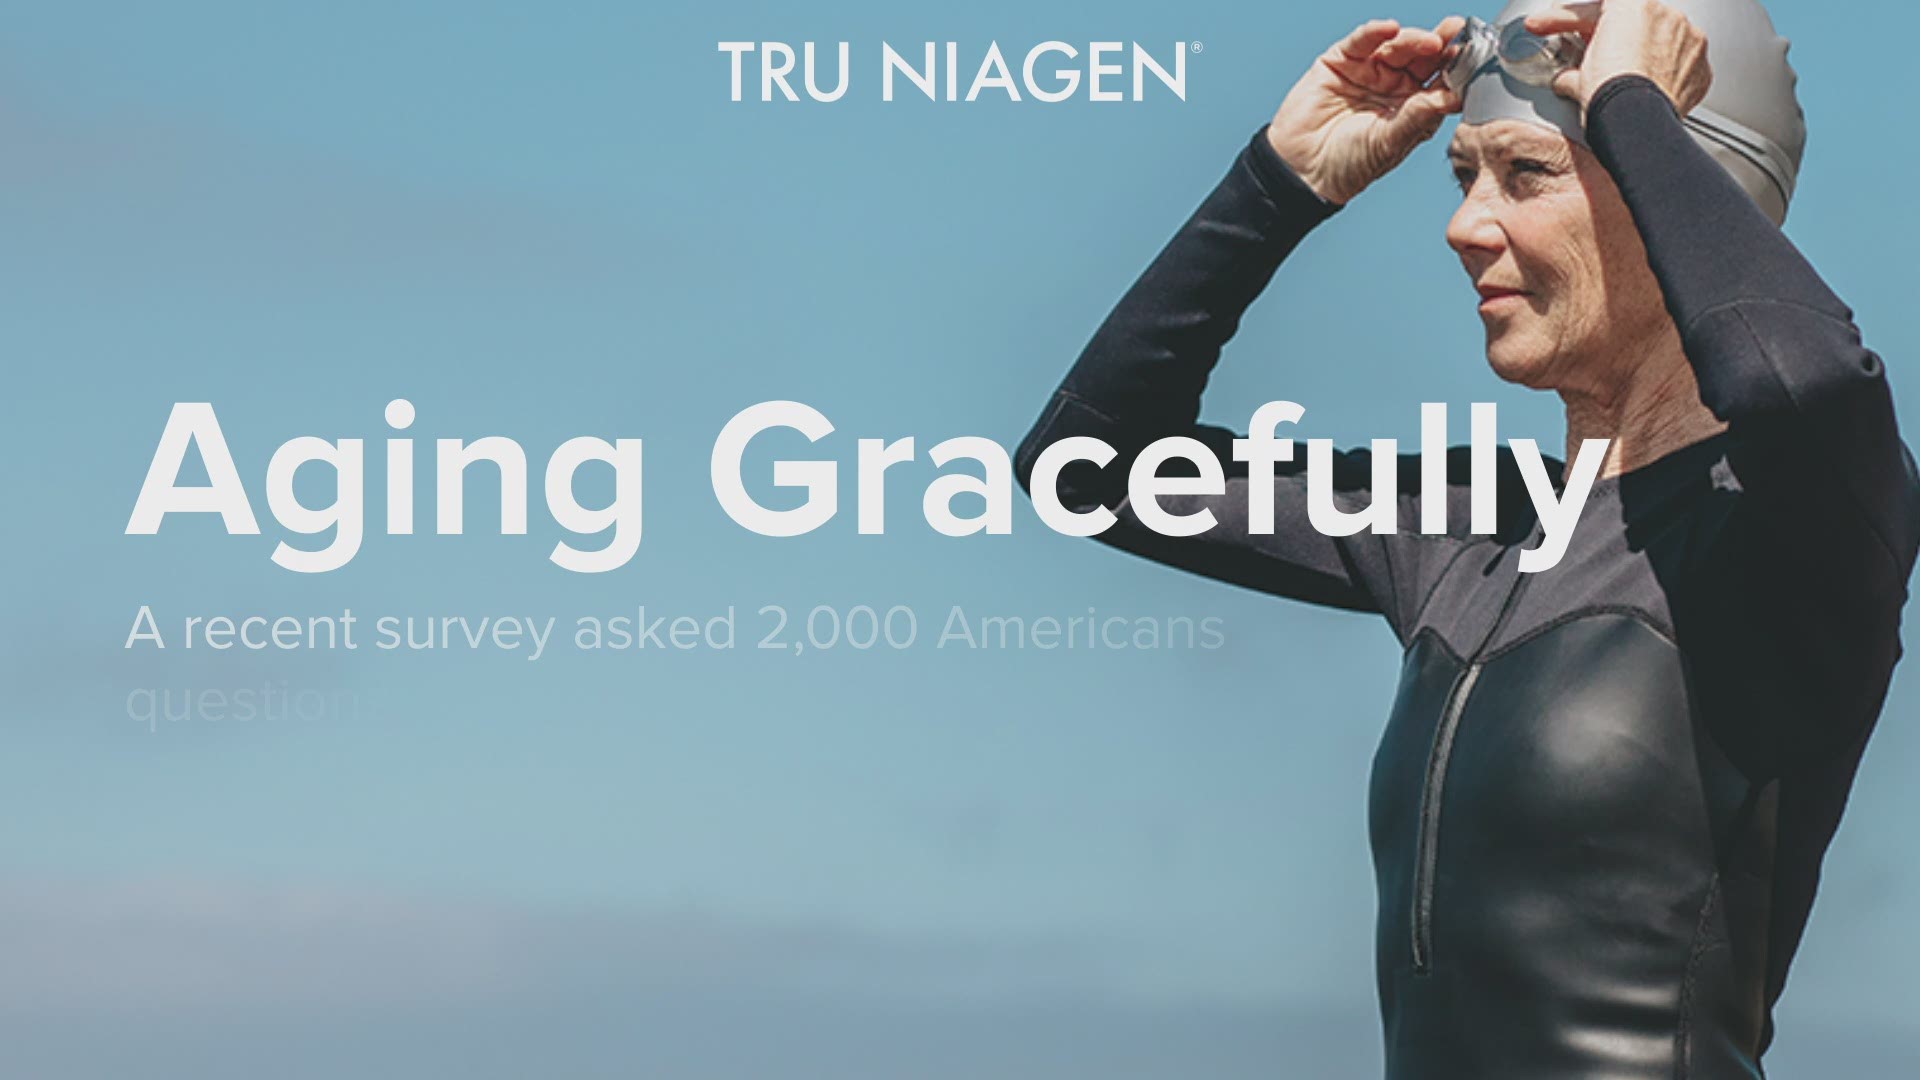 2,000 people took part in a survey that also asked about the best ways to age healthily (video courtesy: Tru Niagen)